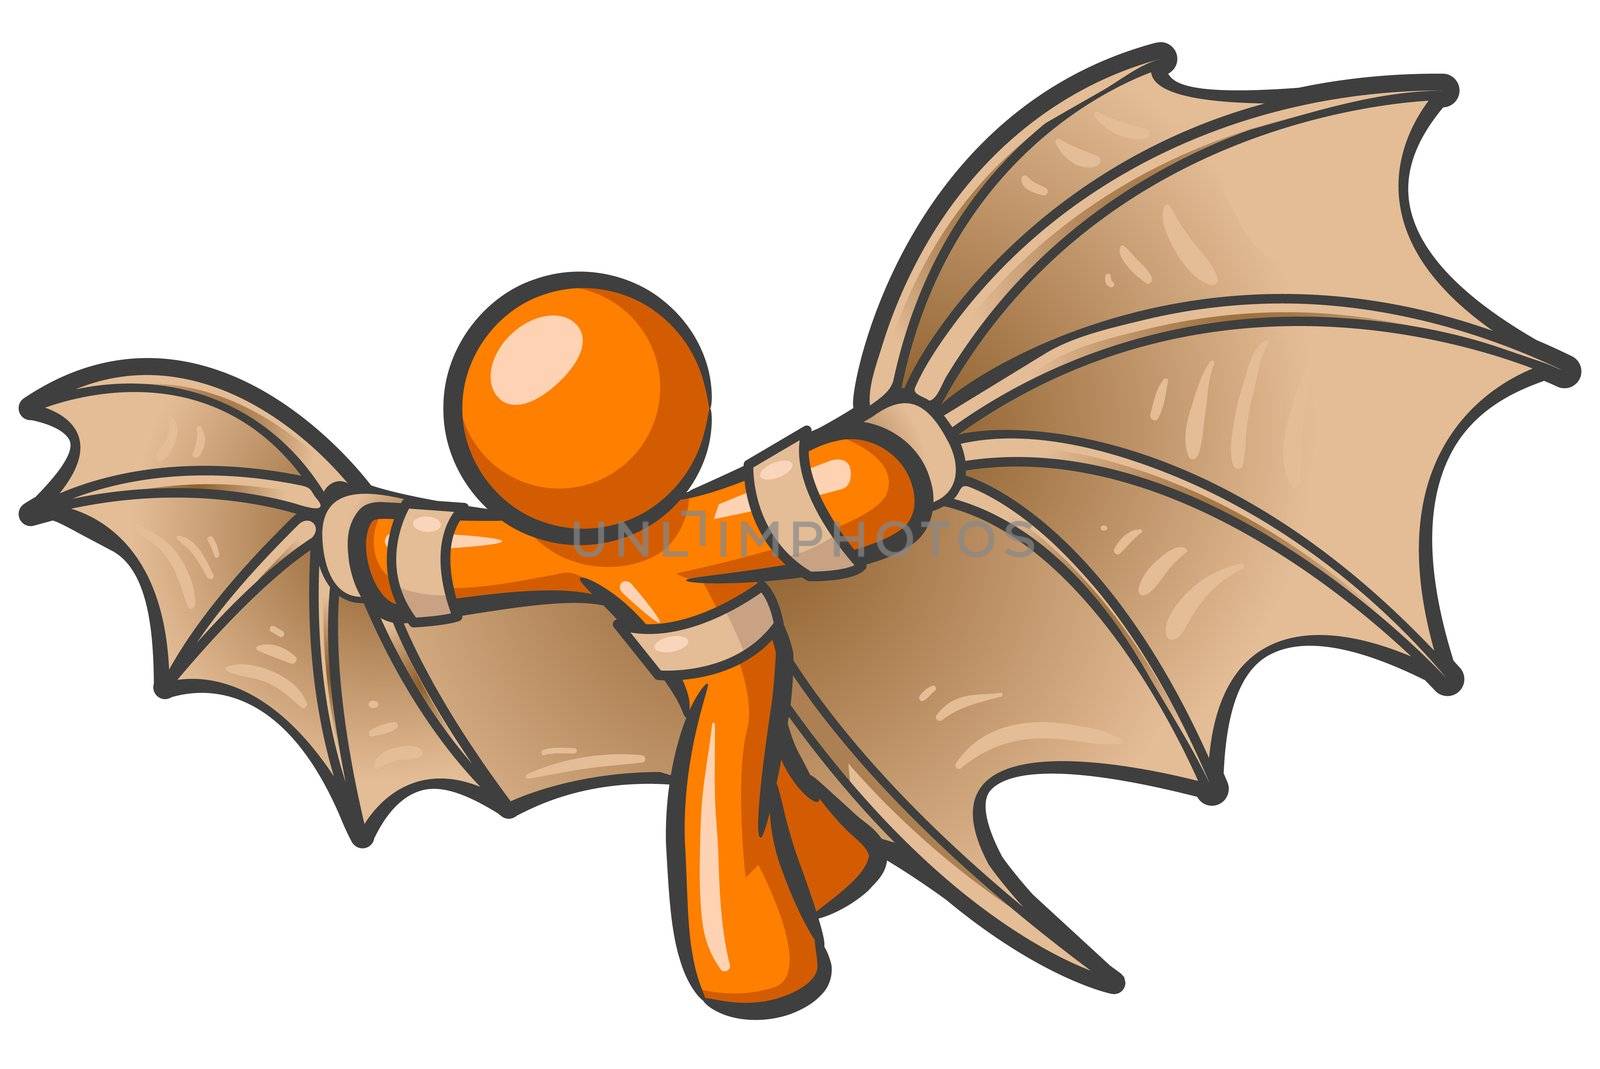 An orange man using a flying contraption he invented, in the style of old da vinci type drawings. 